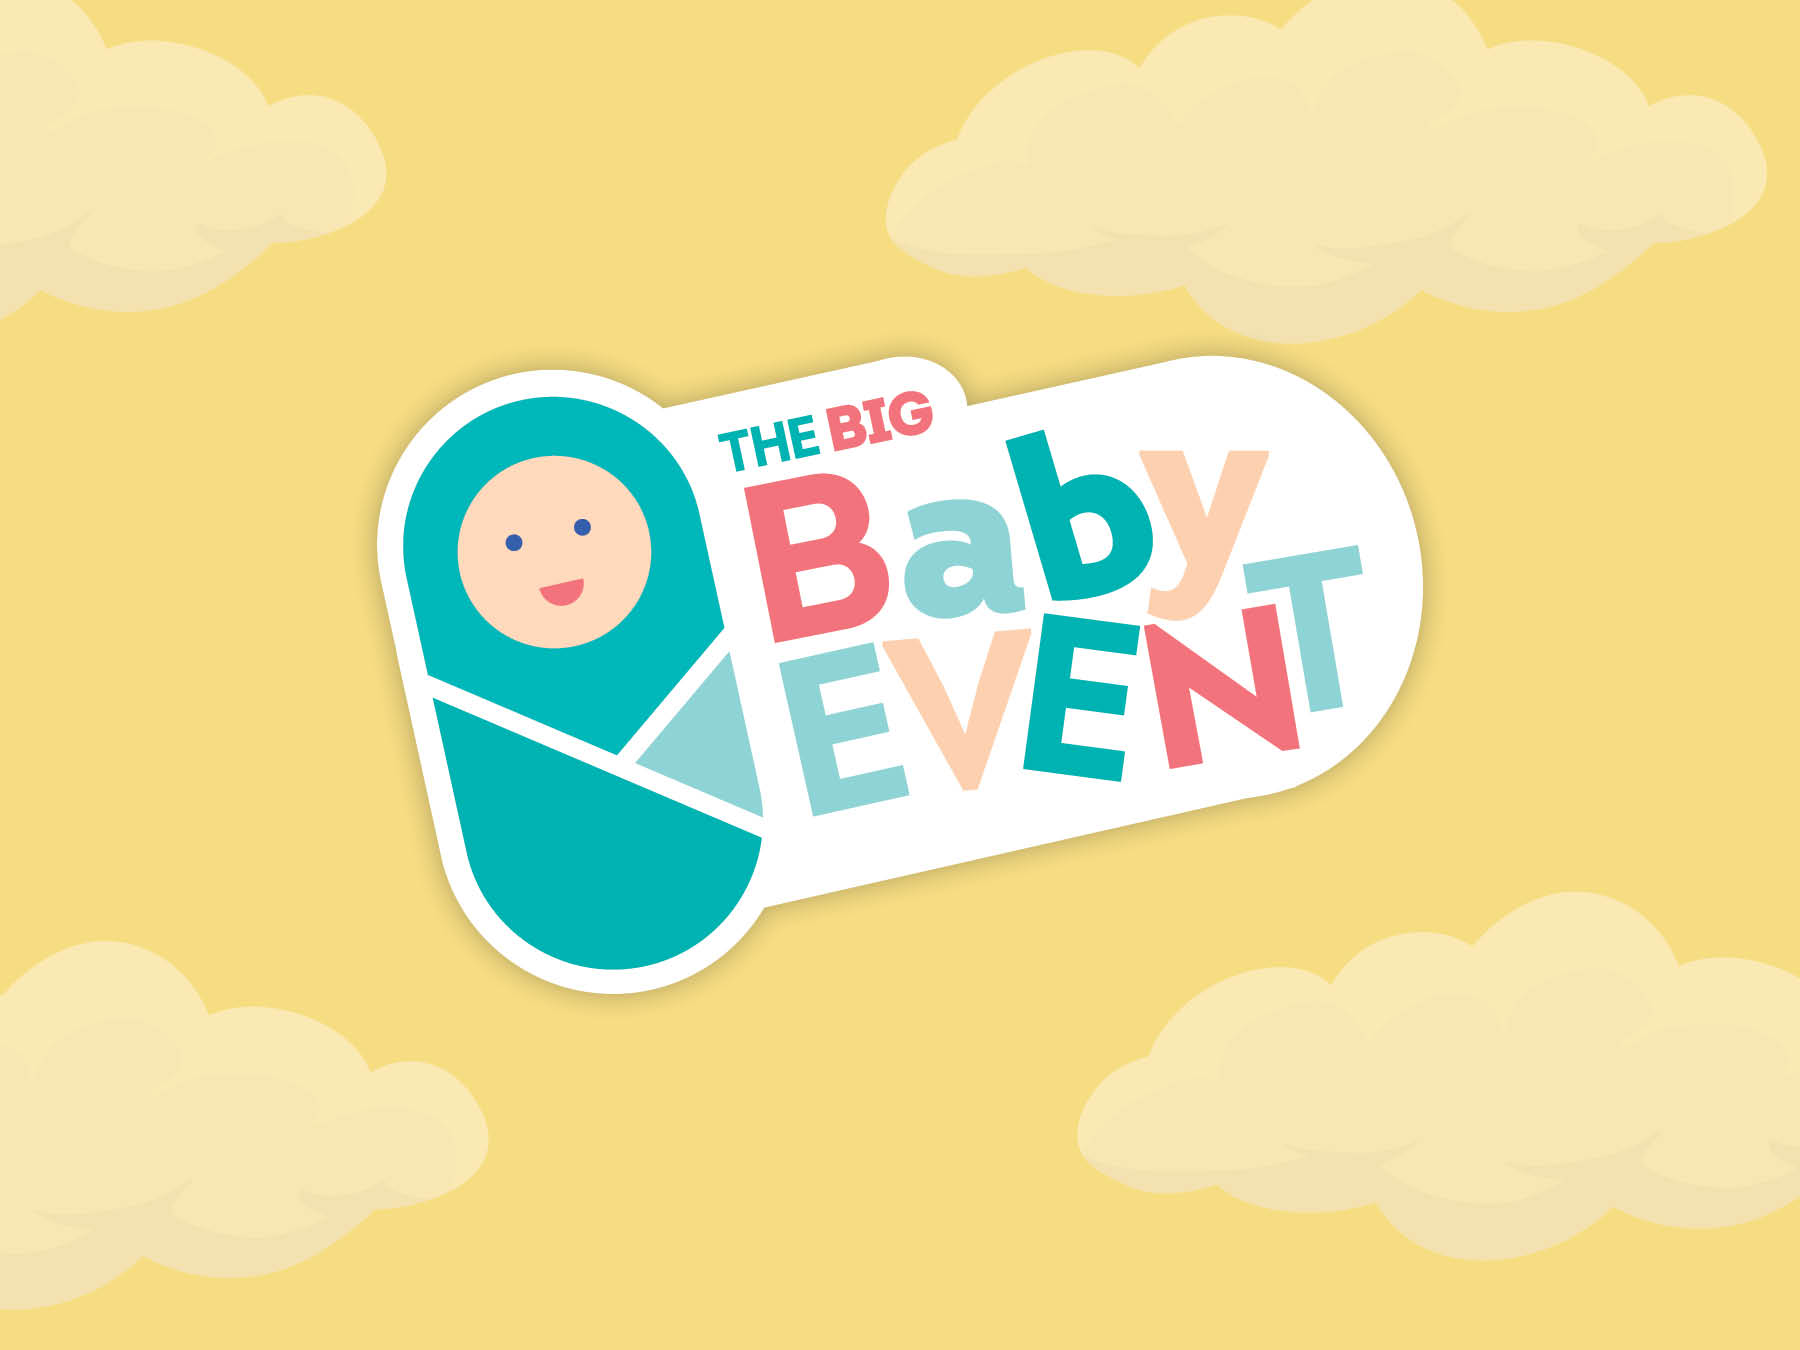 The Big Baby Event - Daily Essentials